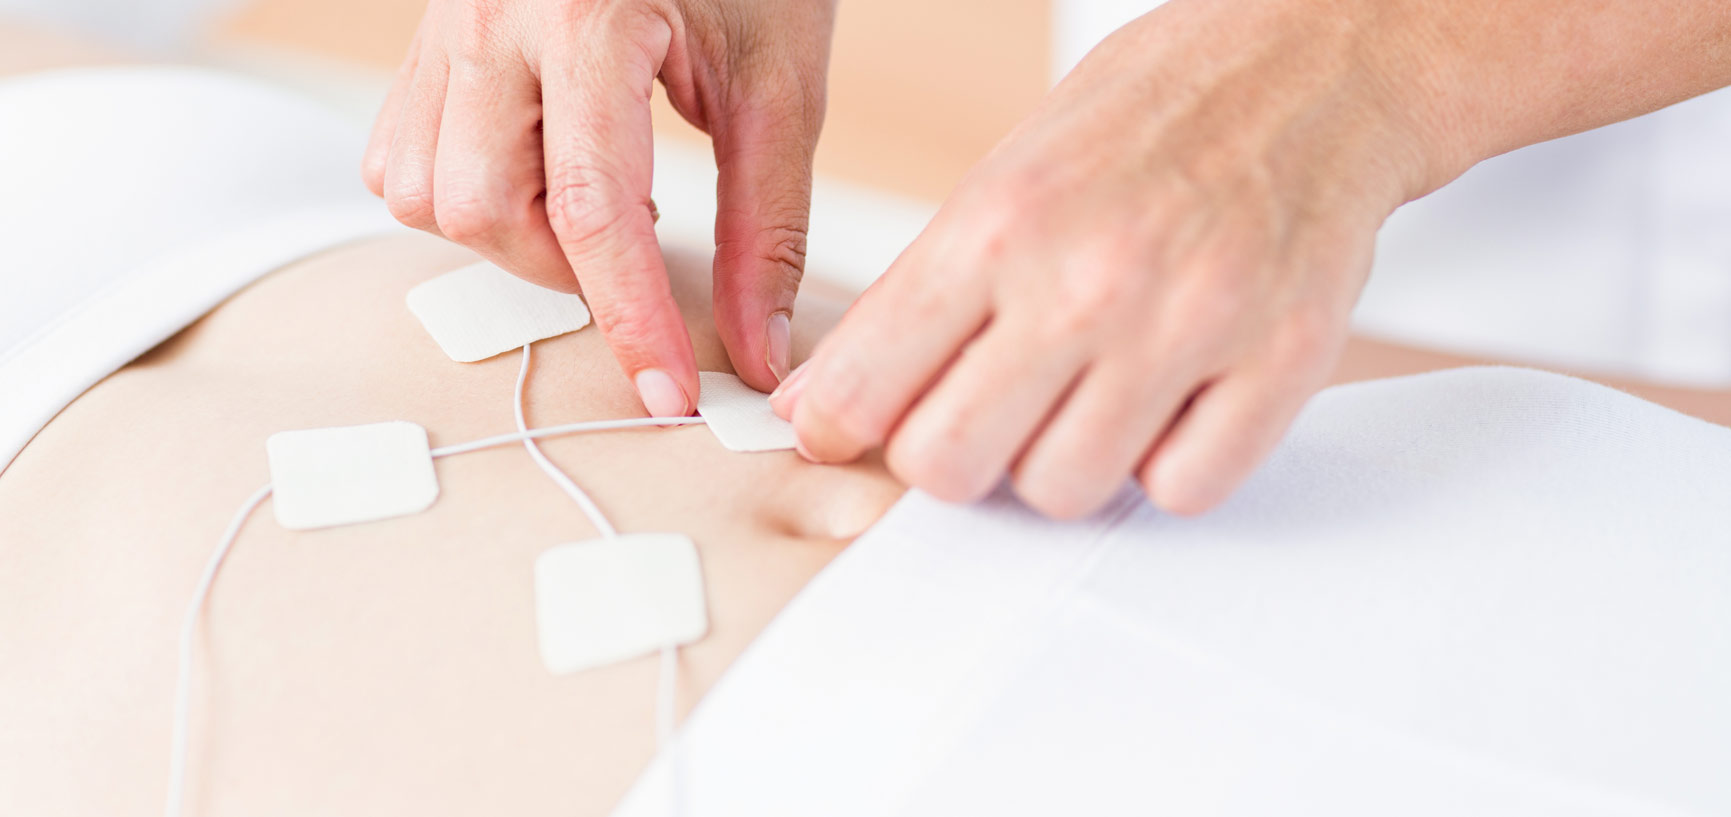 Electrotherapy Devices May Provide Sustained Relief